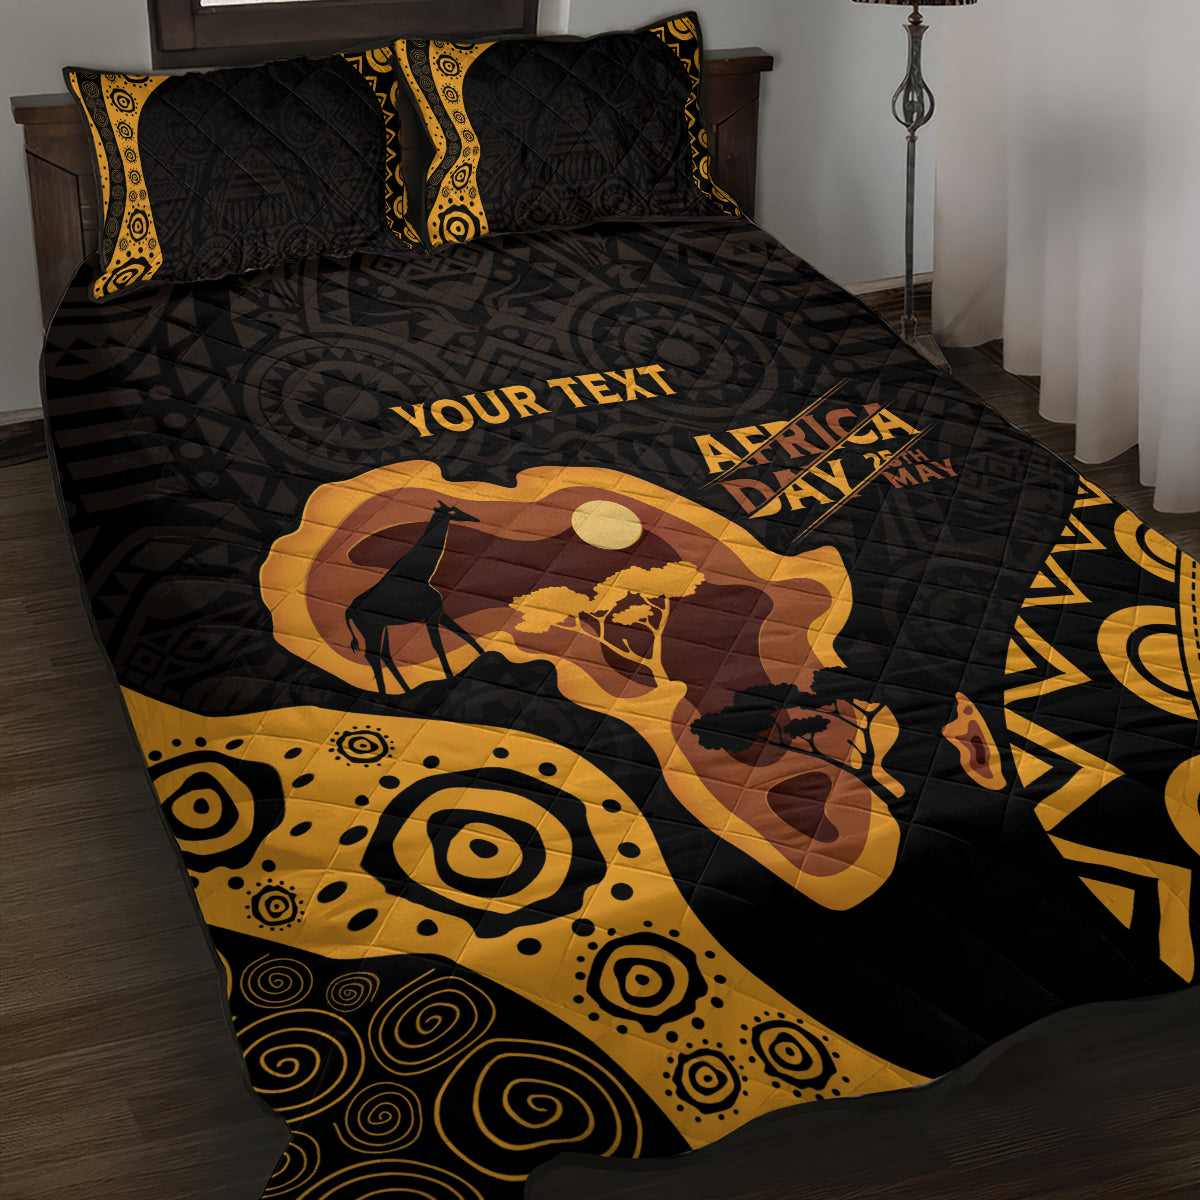 Africa Day Personalized Quilt Bed Set Ethnic Retro Style